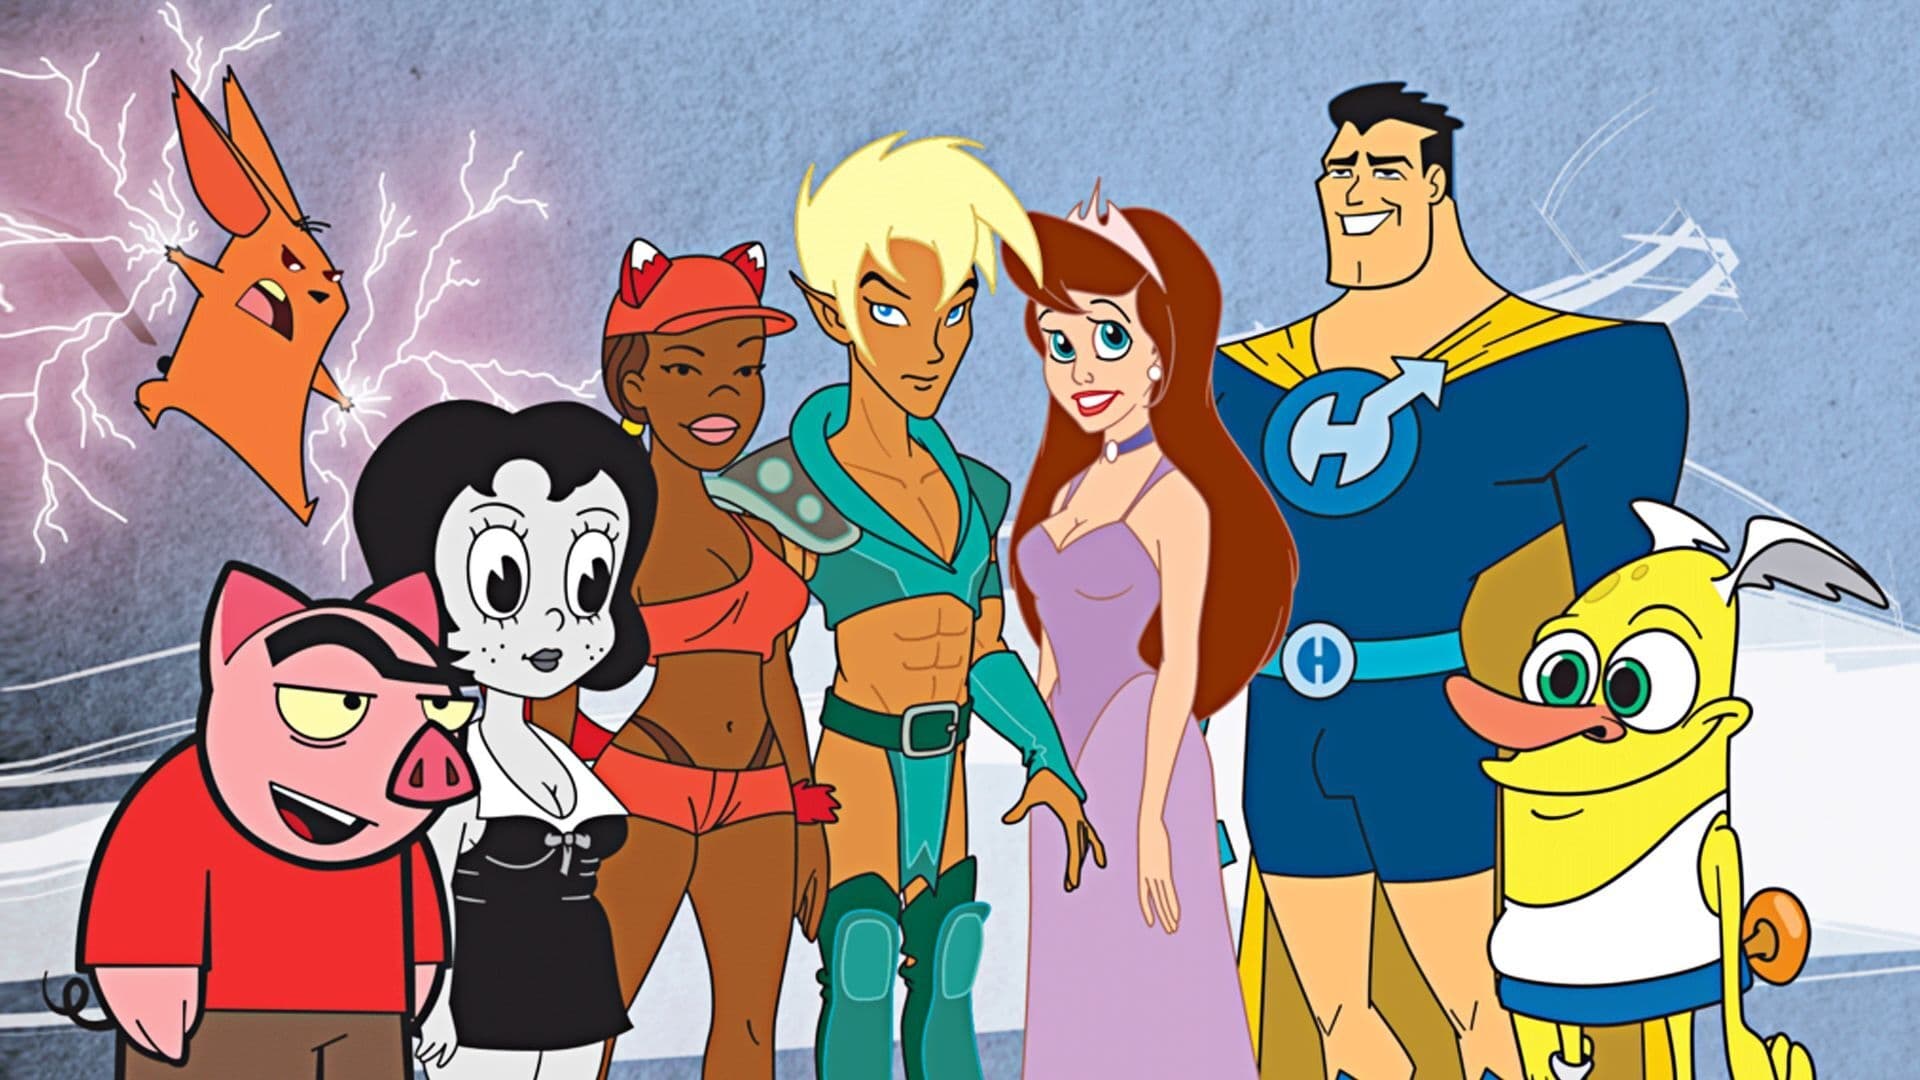 Drawn Together - serie